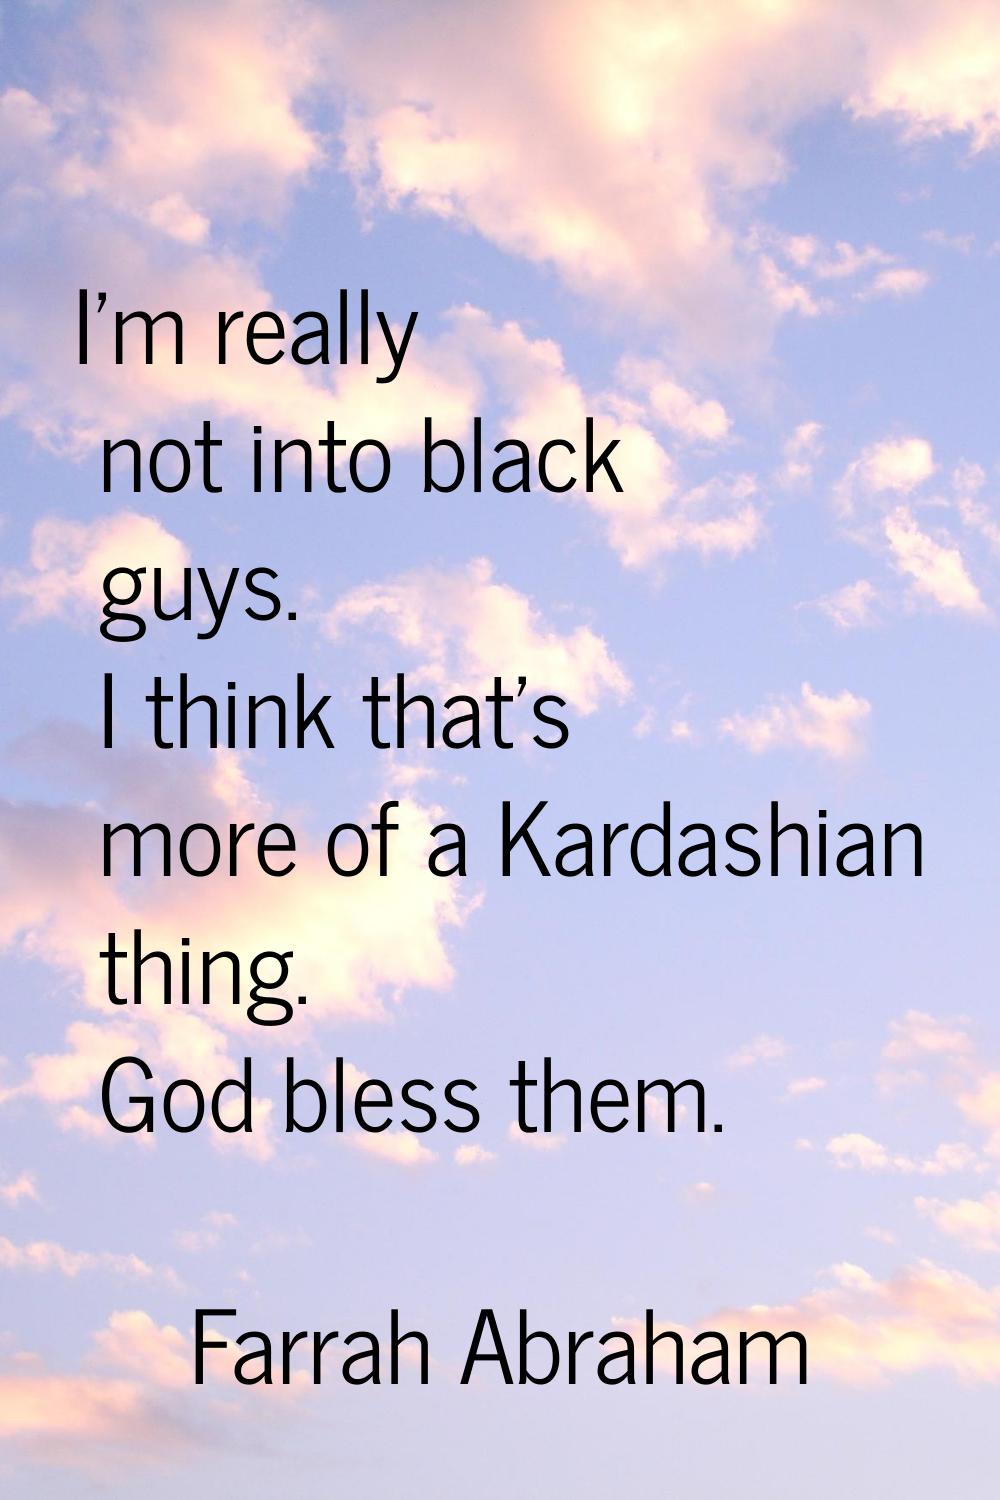 I'm really not into black guys. I think that's more of a Kardashian thing. God bless them.